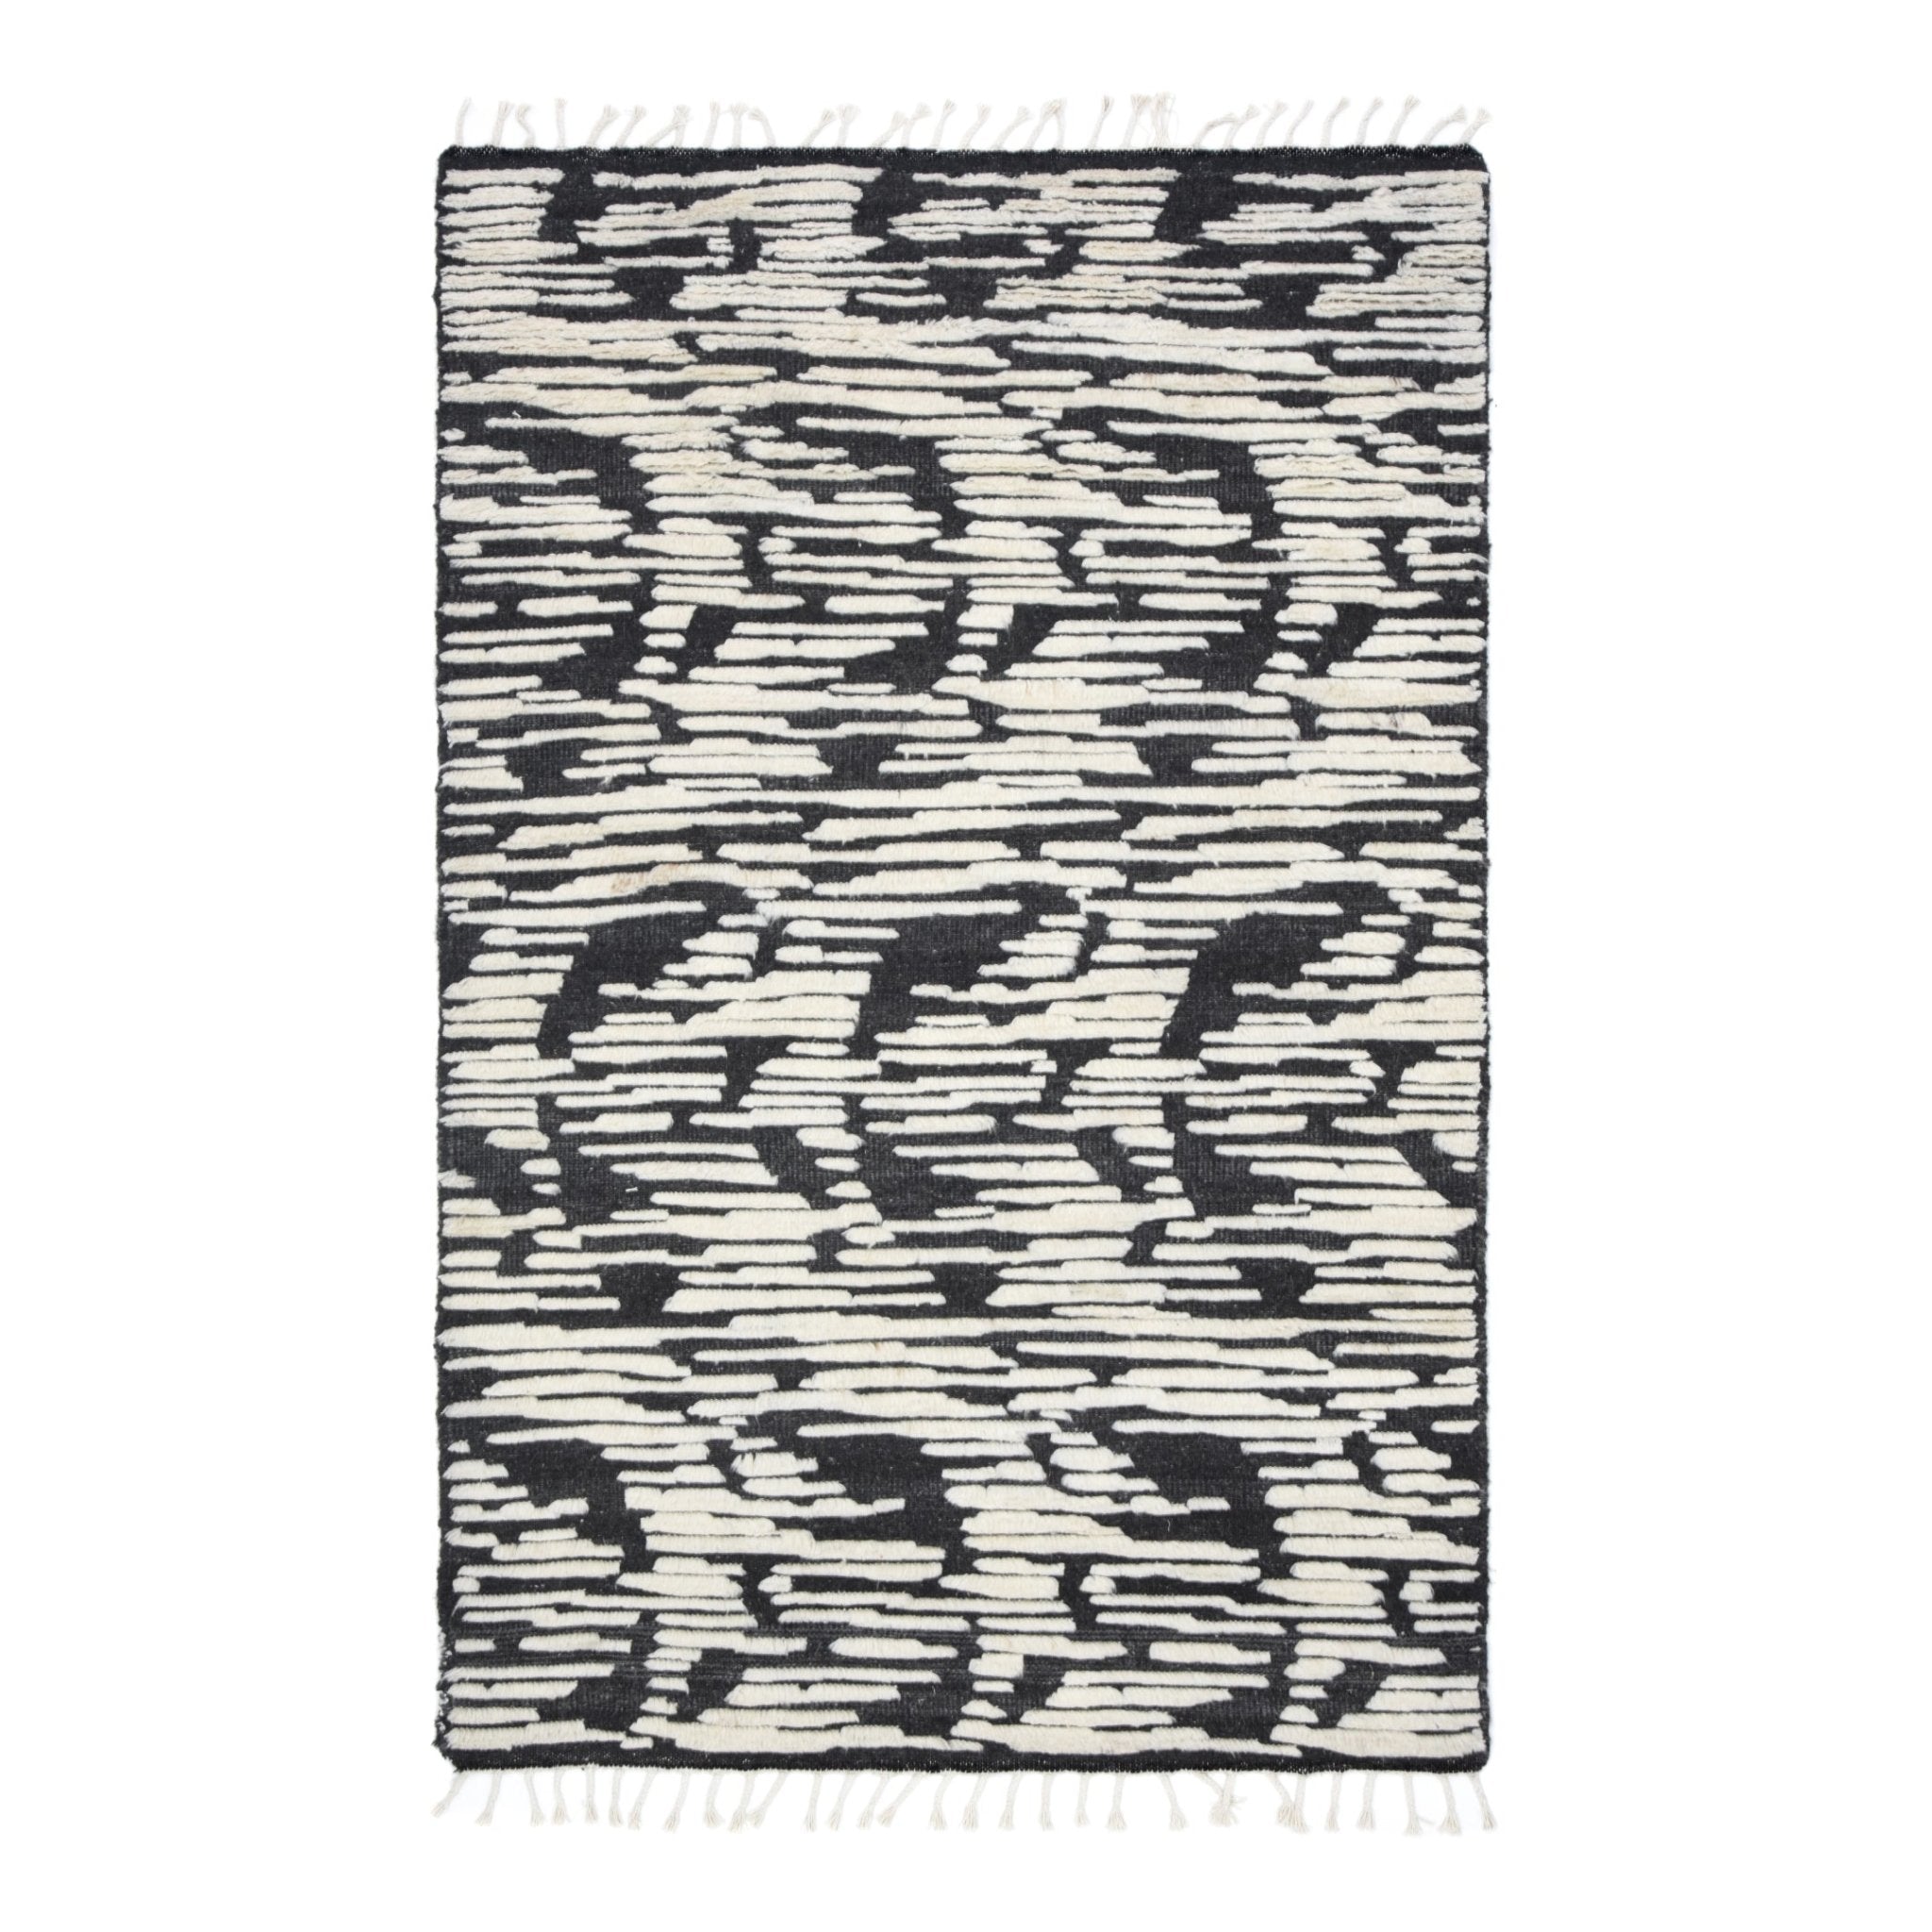 Hand Knotted Wool Rug 013 - aucentic